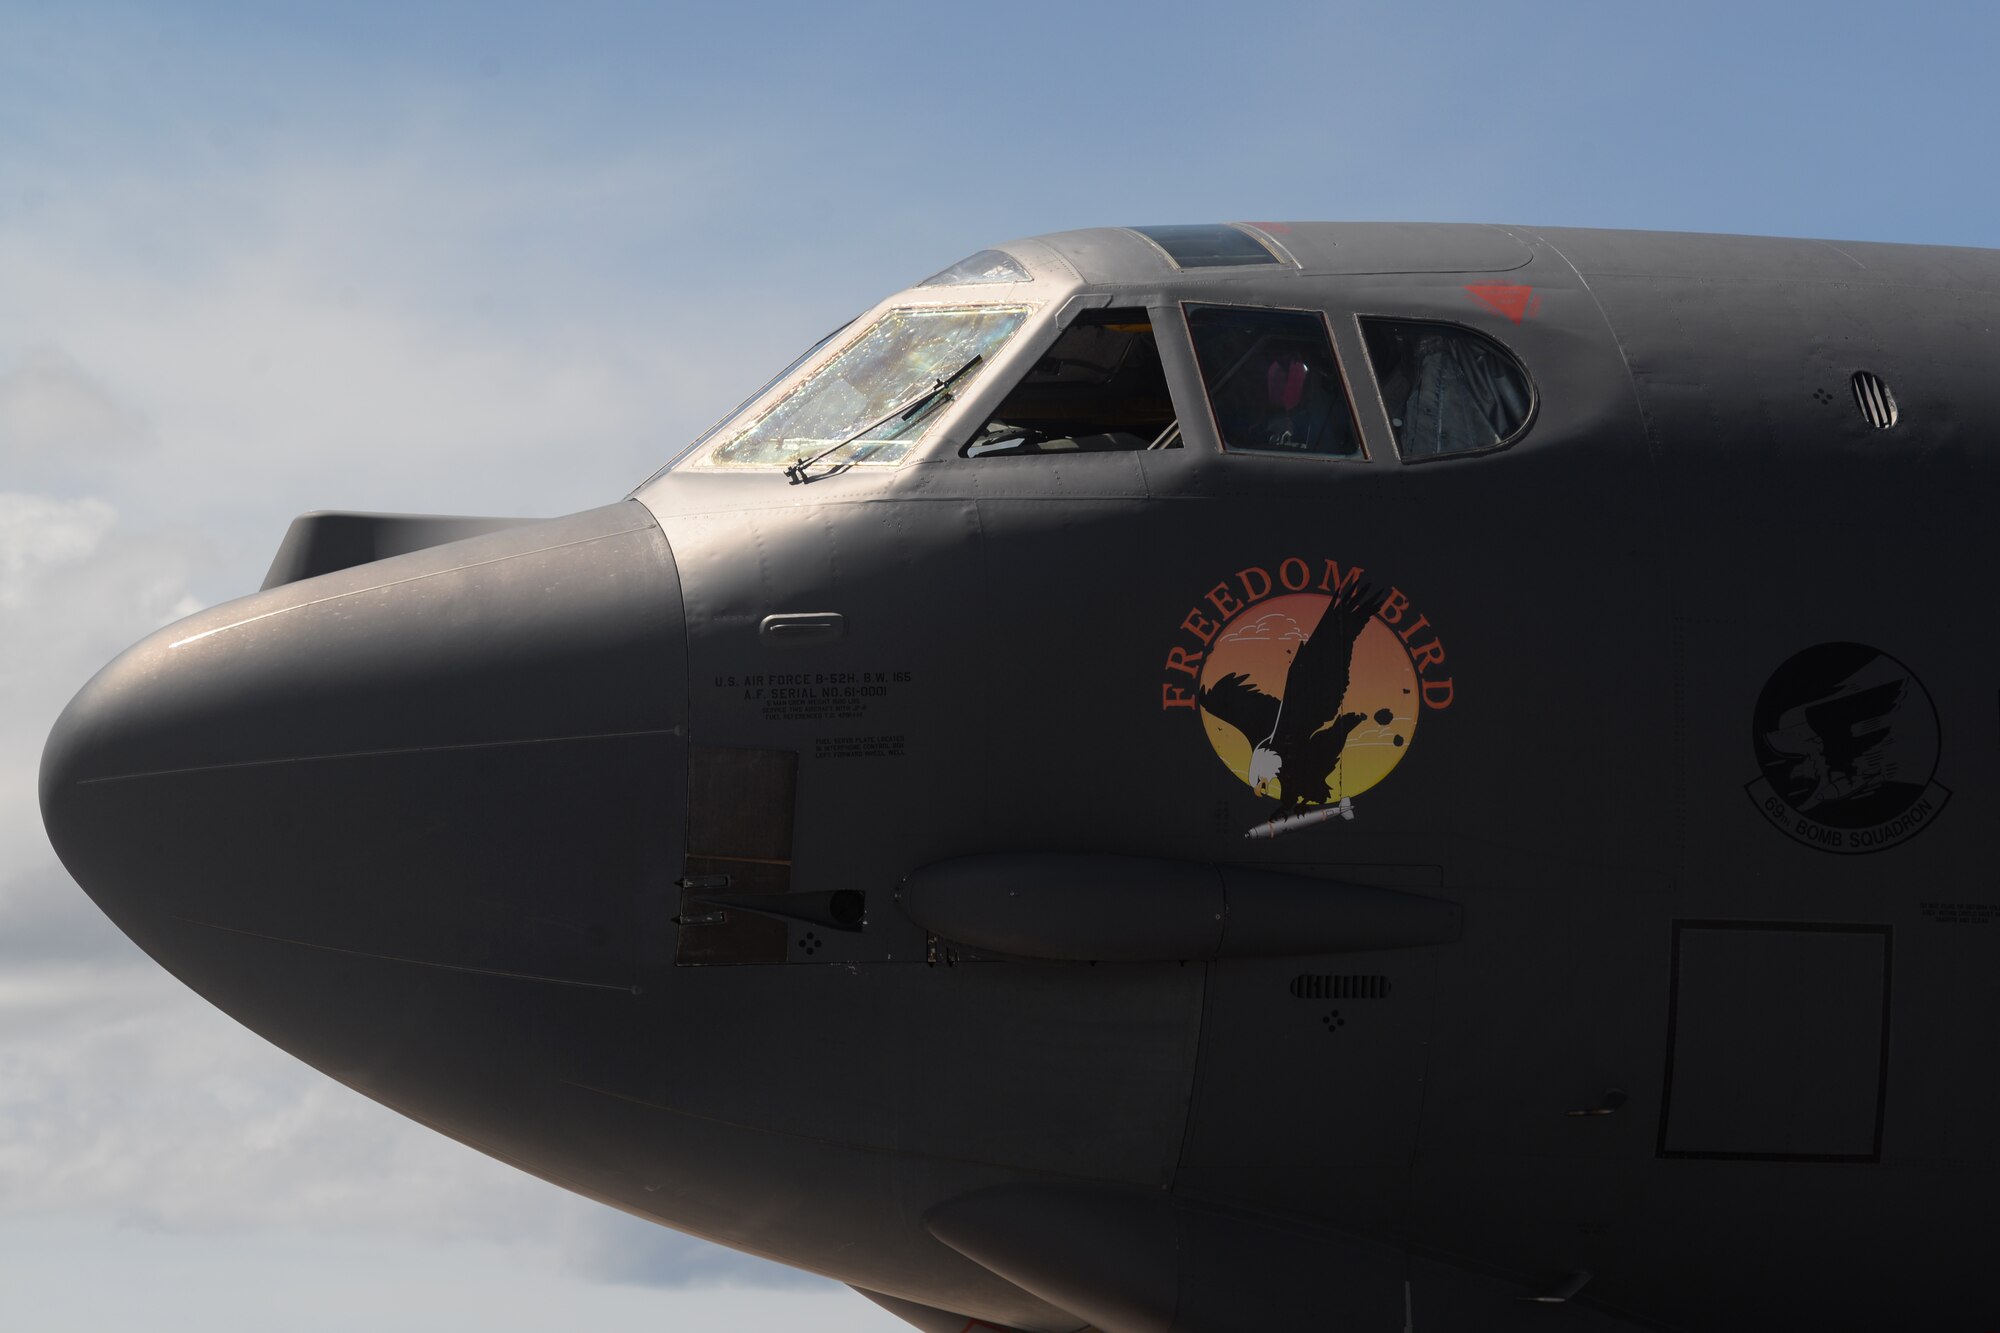 A B-52 Stratofortress and crew arrives June 2, 2016, at Andersen Air Force Base, Guam. The aircraft is deployed in support of U.S. Pacific Command’s Continuous Bomber Presence operations. Deployments such as this provide opportunities to advance and strengthen alliances as well as strengthen long-standing military-to-military partnerships. (U.S. Air Force photo by Airman 1st Class Alexa Ann Henderson/Released)